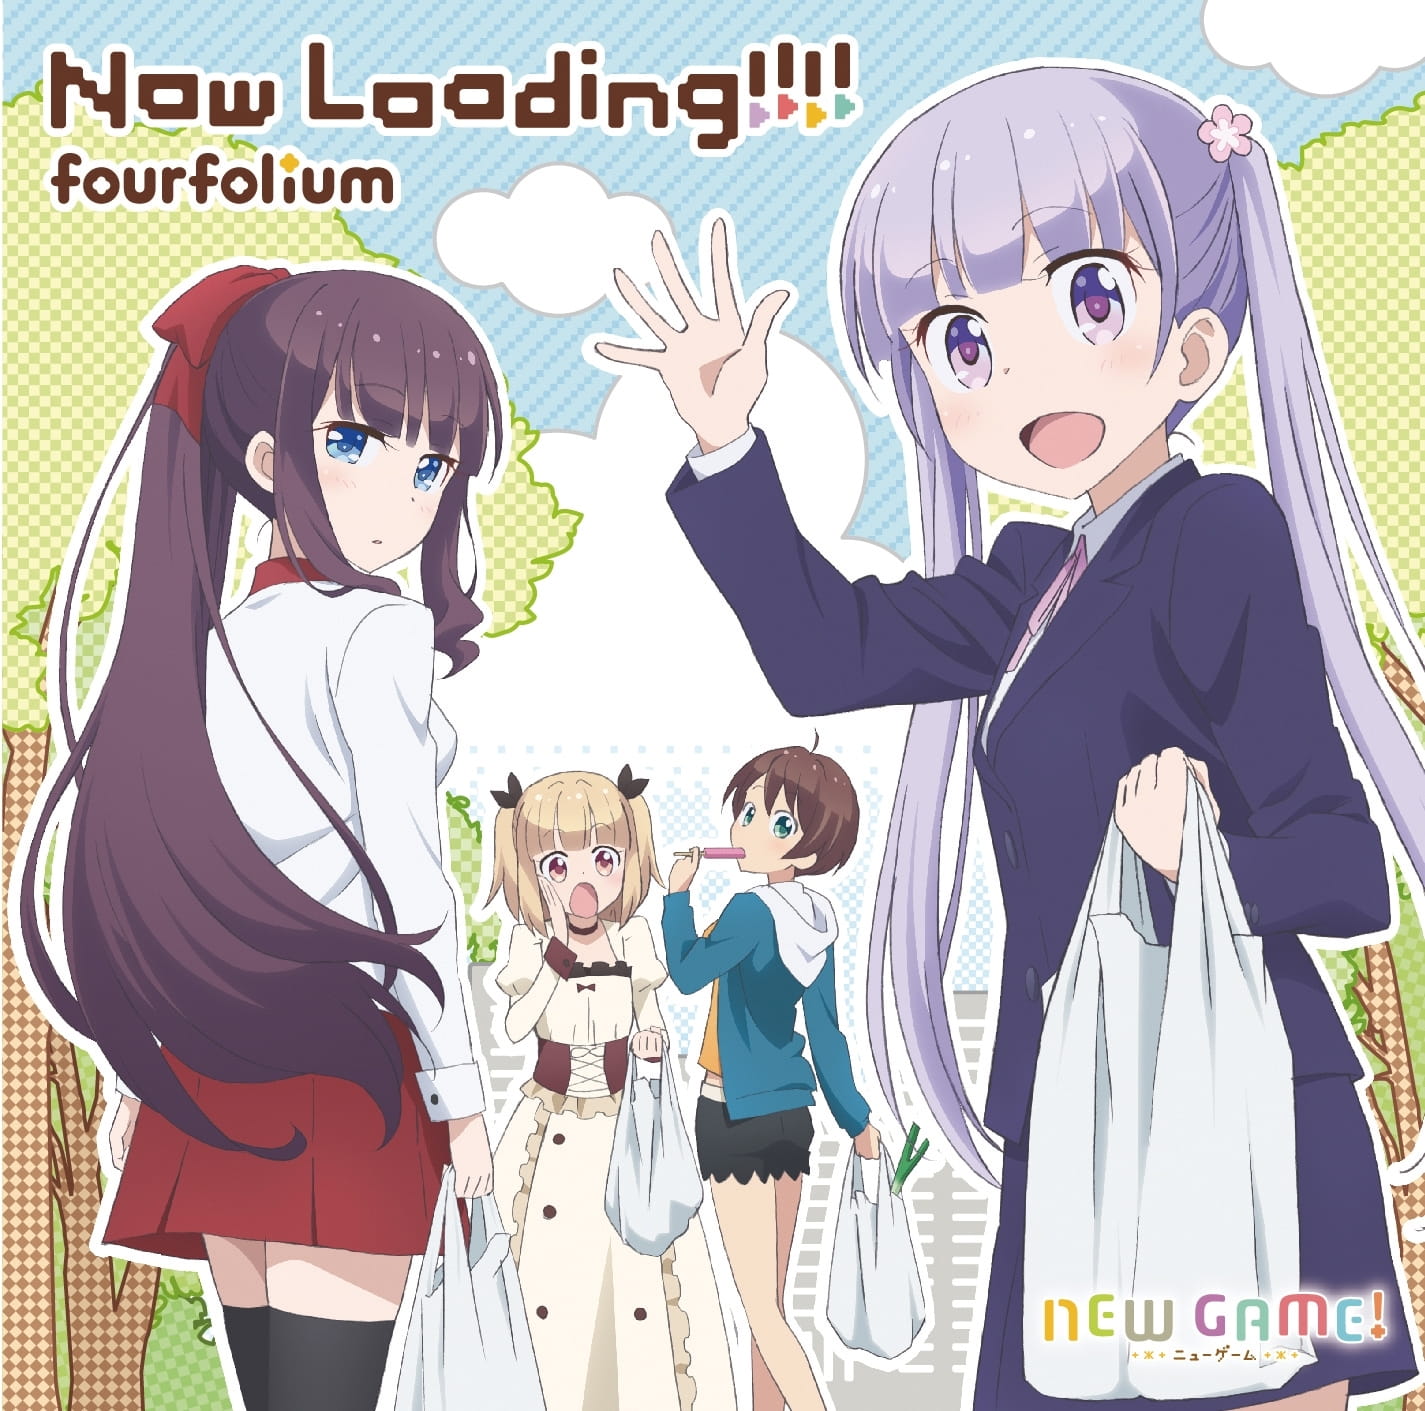 NEW GAME,片尾曲,ED,Now Loading!!!!,动漫音乐